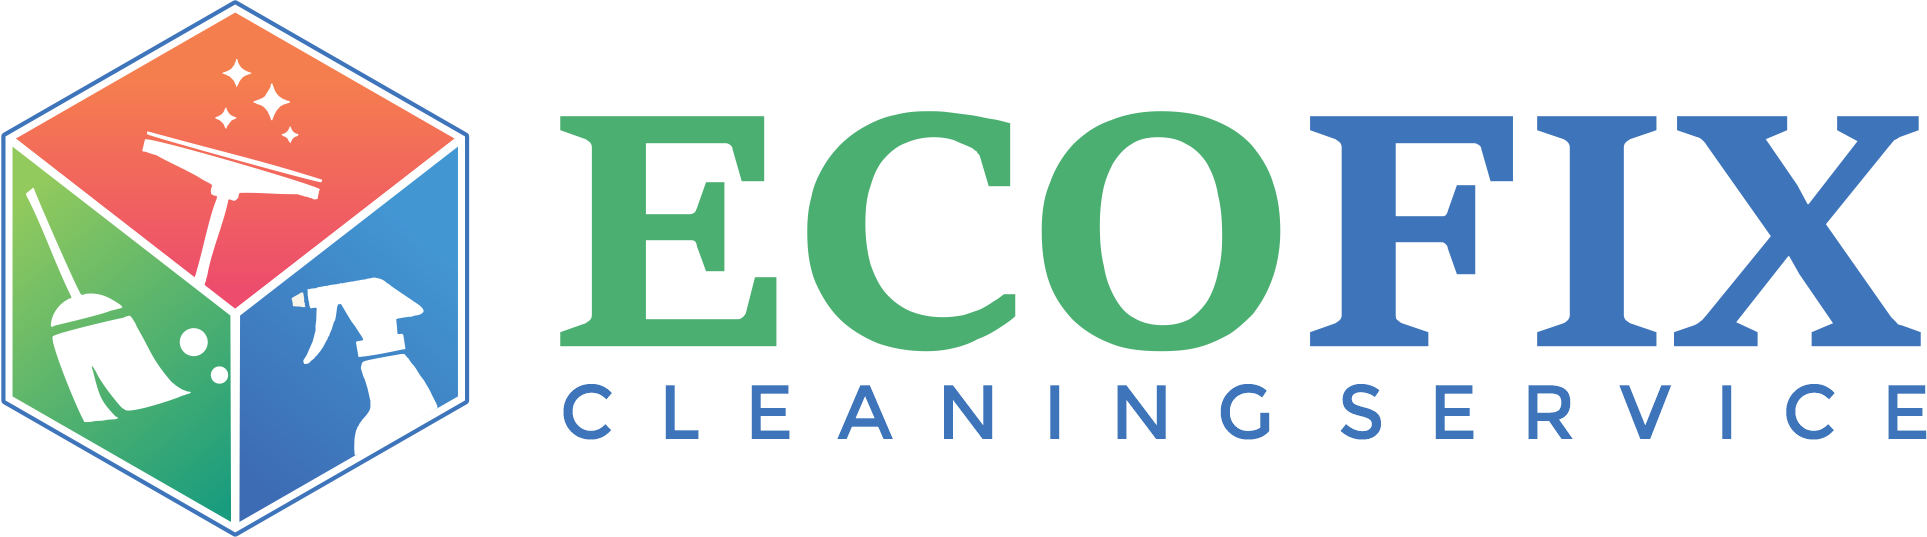 Eco Fix Cleaning Services Logo